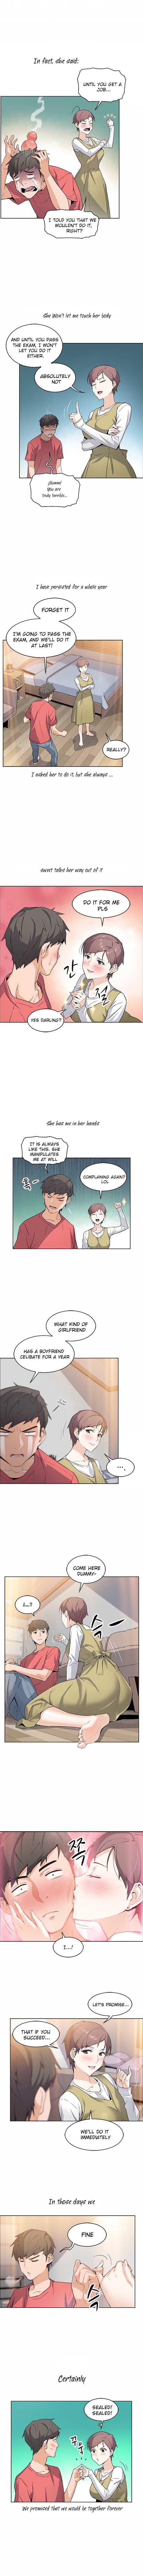 Leggings Housekeeper [Neck Pillow, Paper] Ch.49/49 [English] [Manhwa PDF] Completed Vadia - Page 7